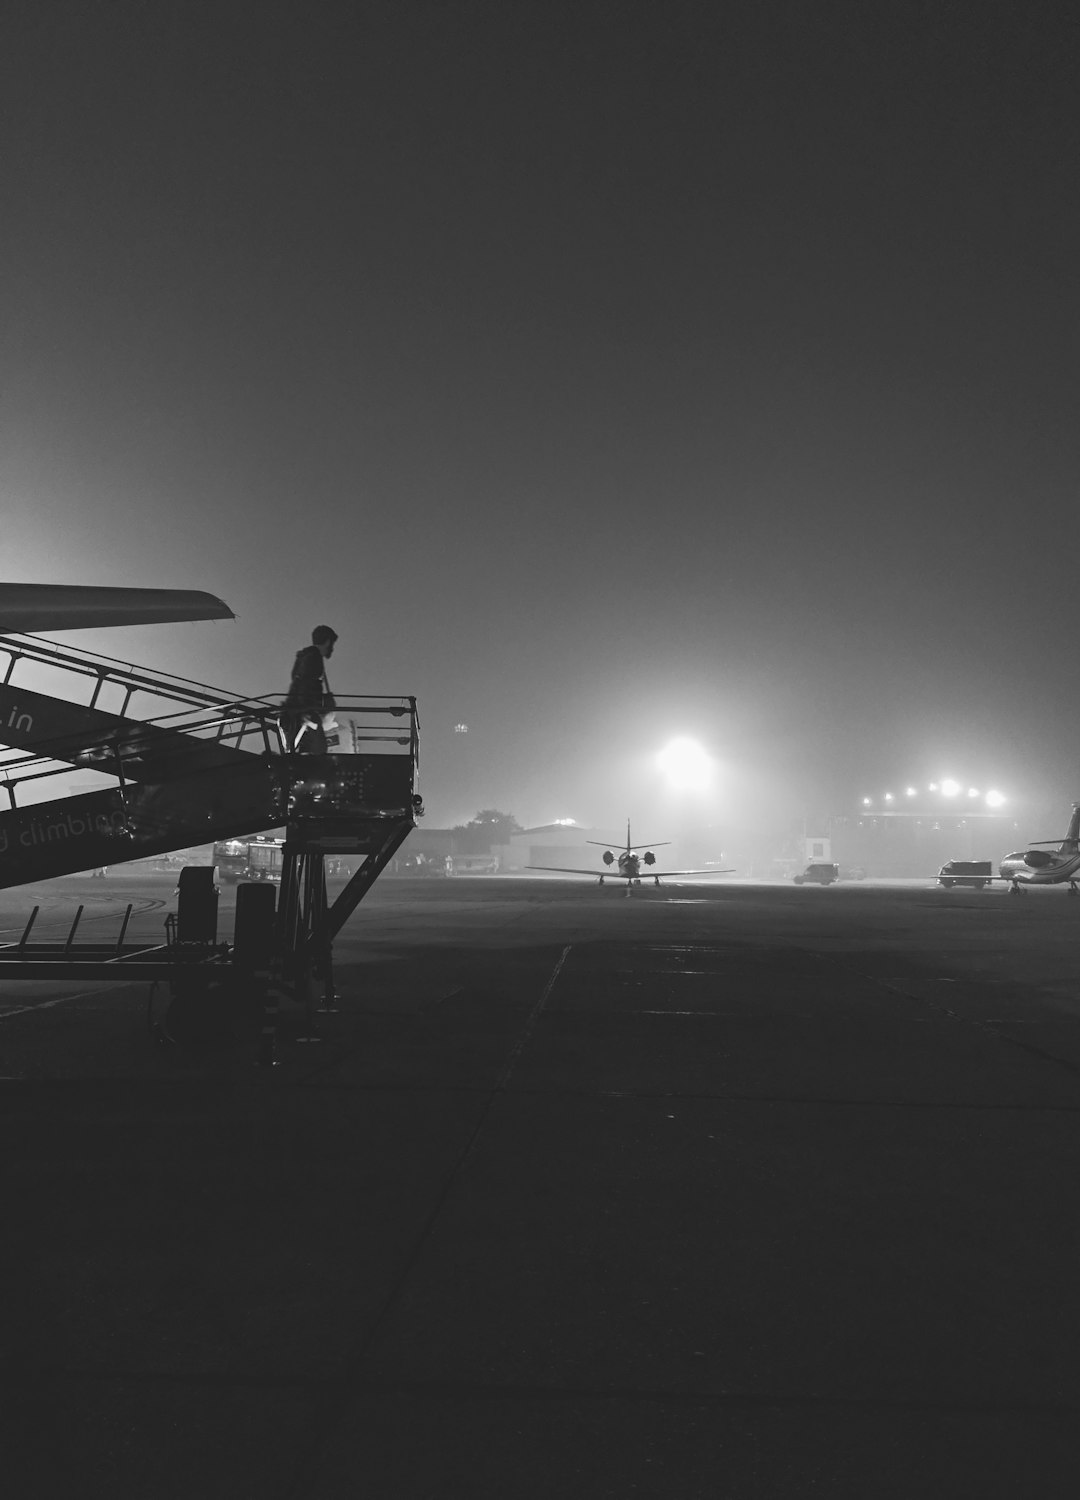 grayscale photography of person walking on airliner stairs